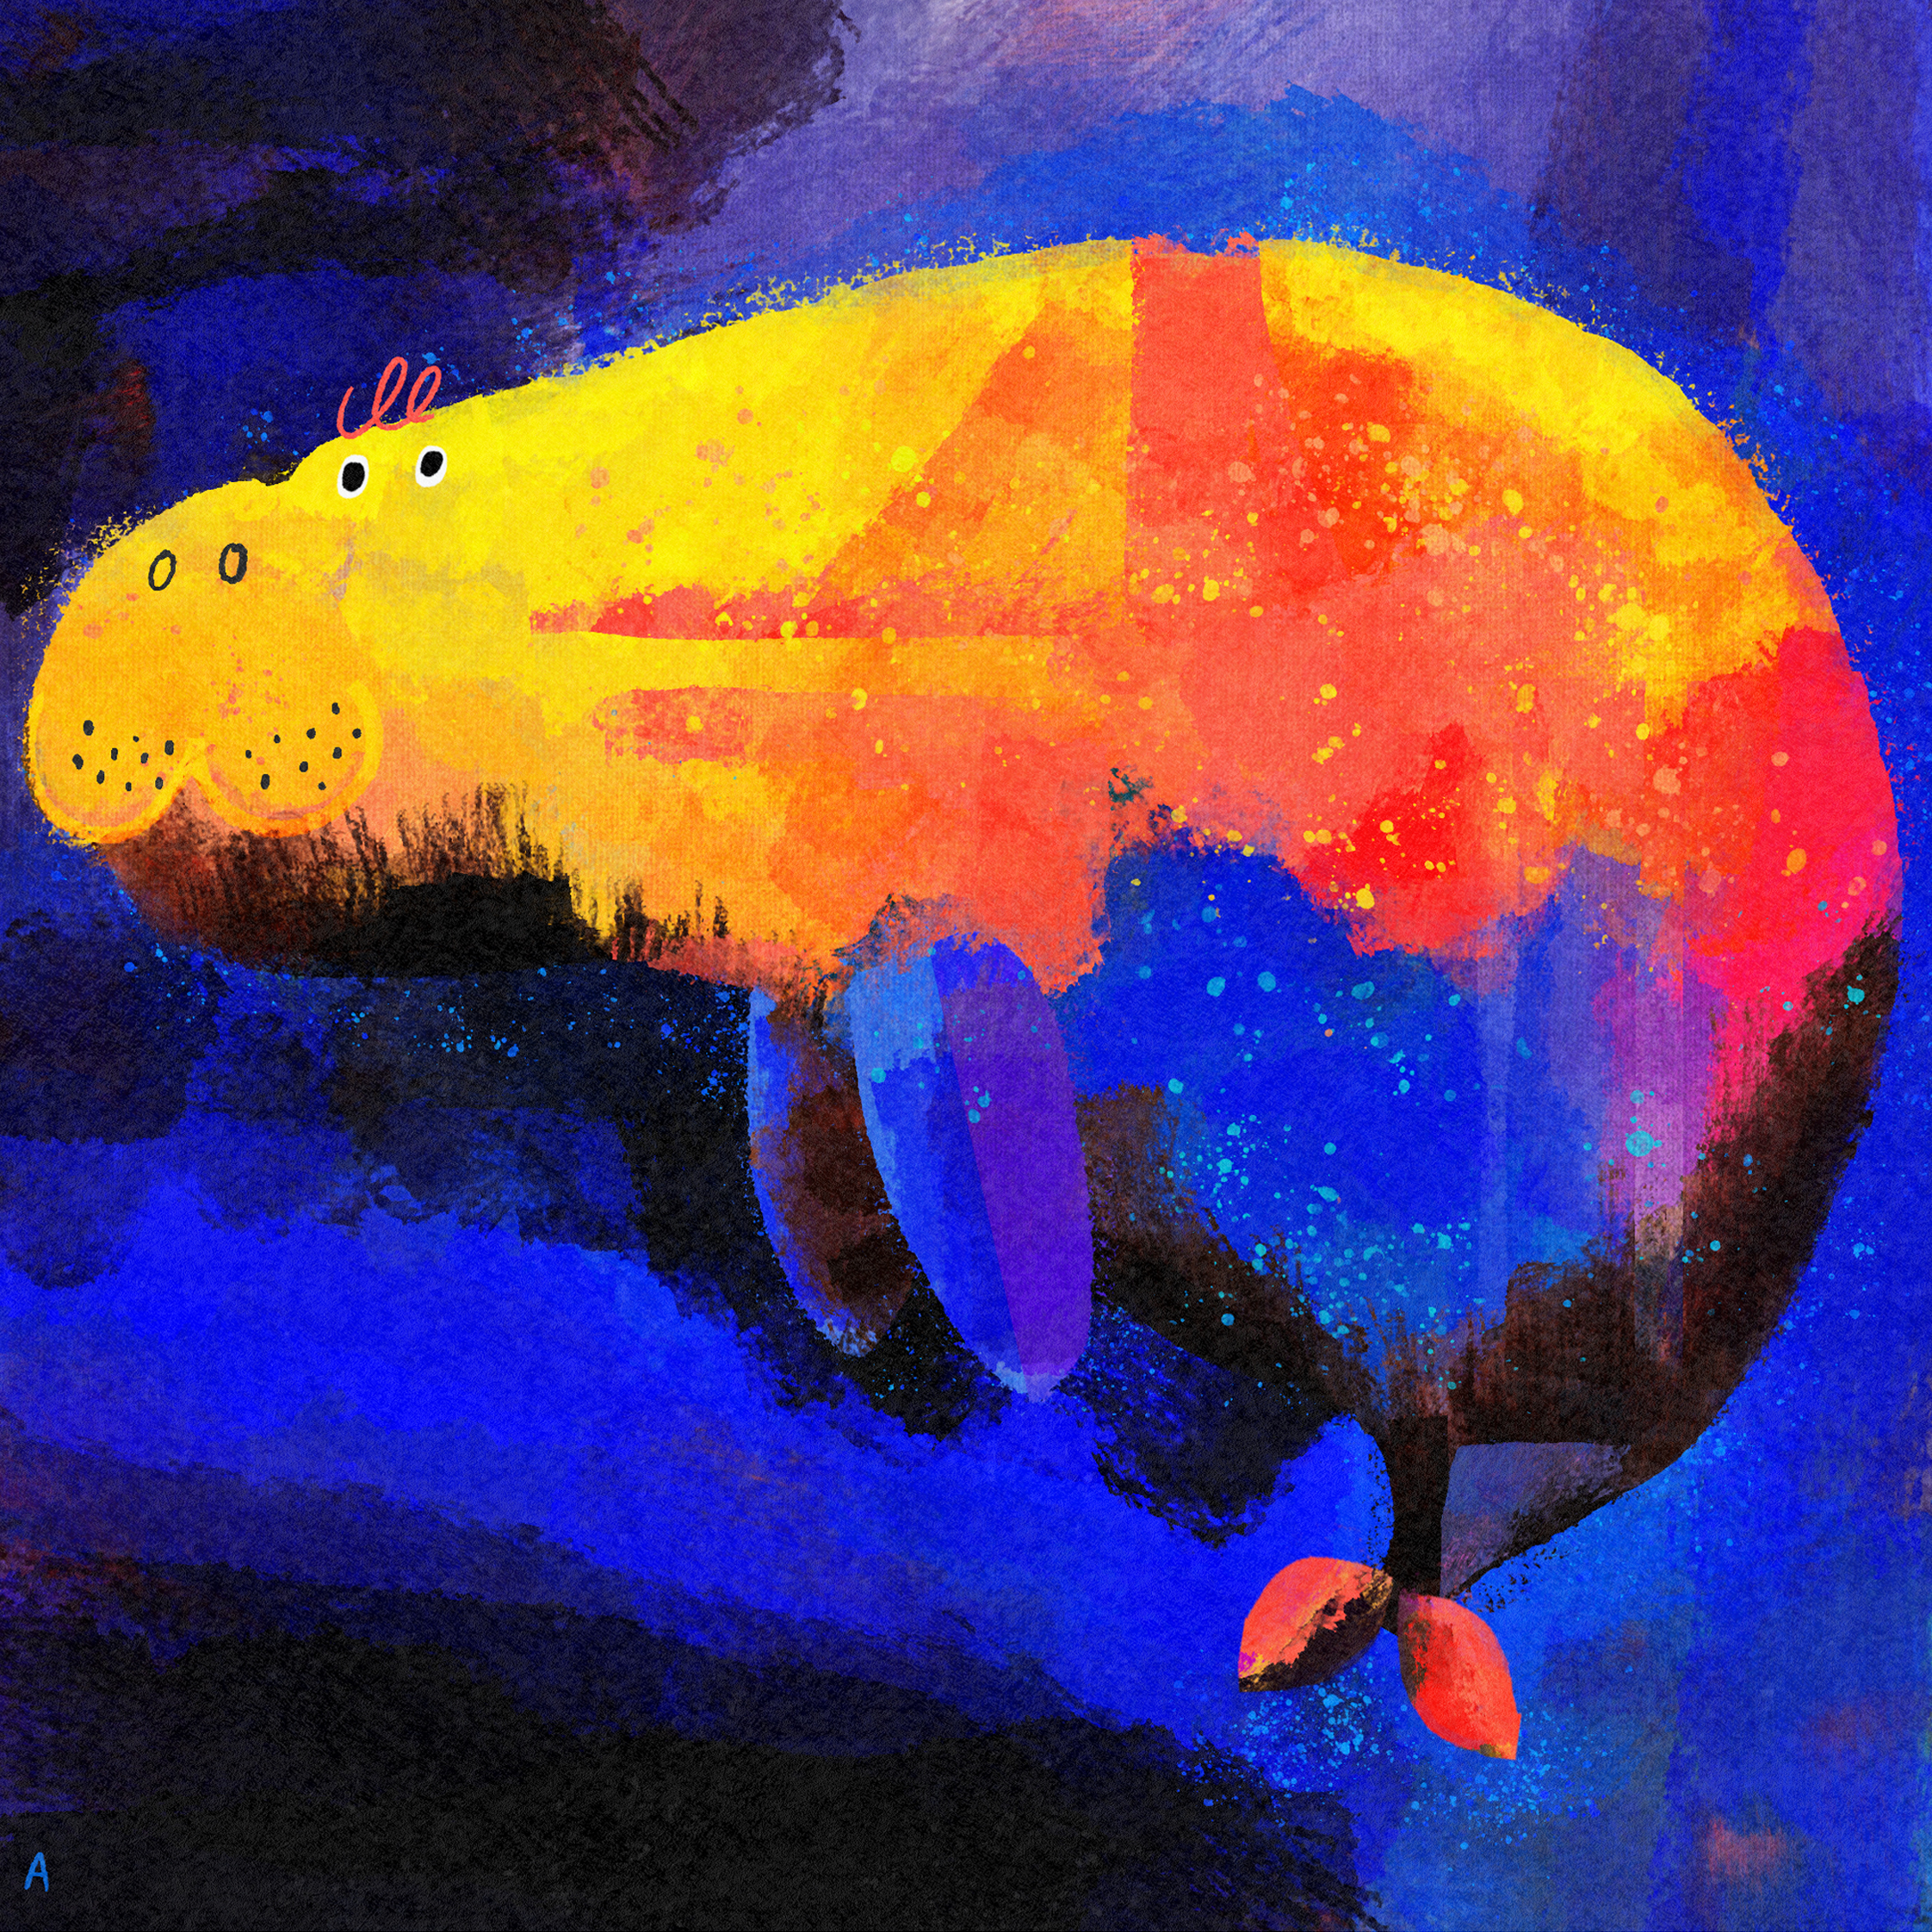 Very colourful painted dugong on a blue background. The red, orange and yellow paint is in broad strokes, with the dugong's cat or dog shaped muzzle drawn in detail with pen, including eyes, nostrils and little whisker-dots. 